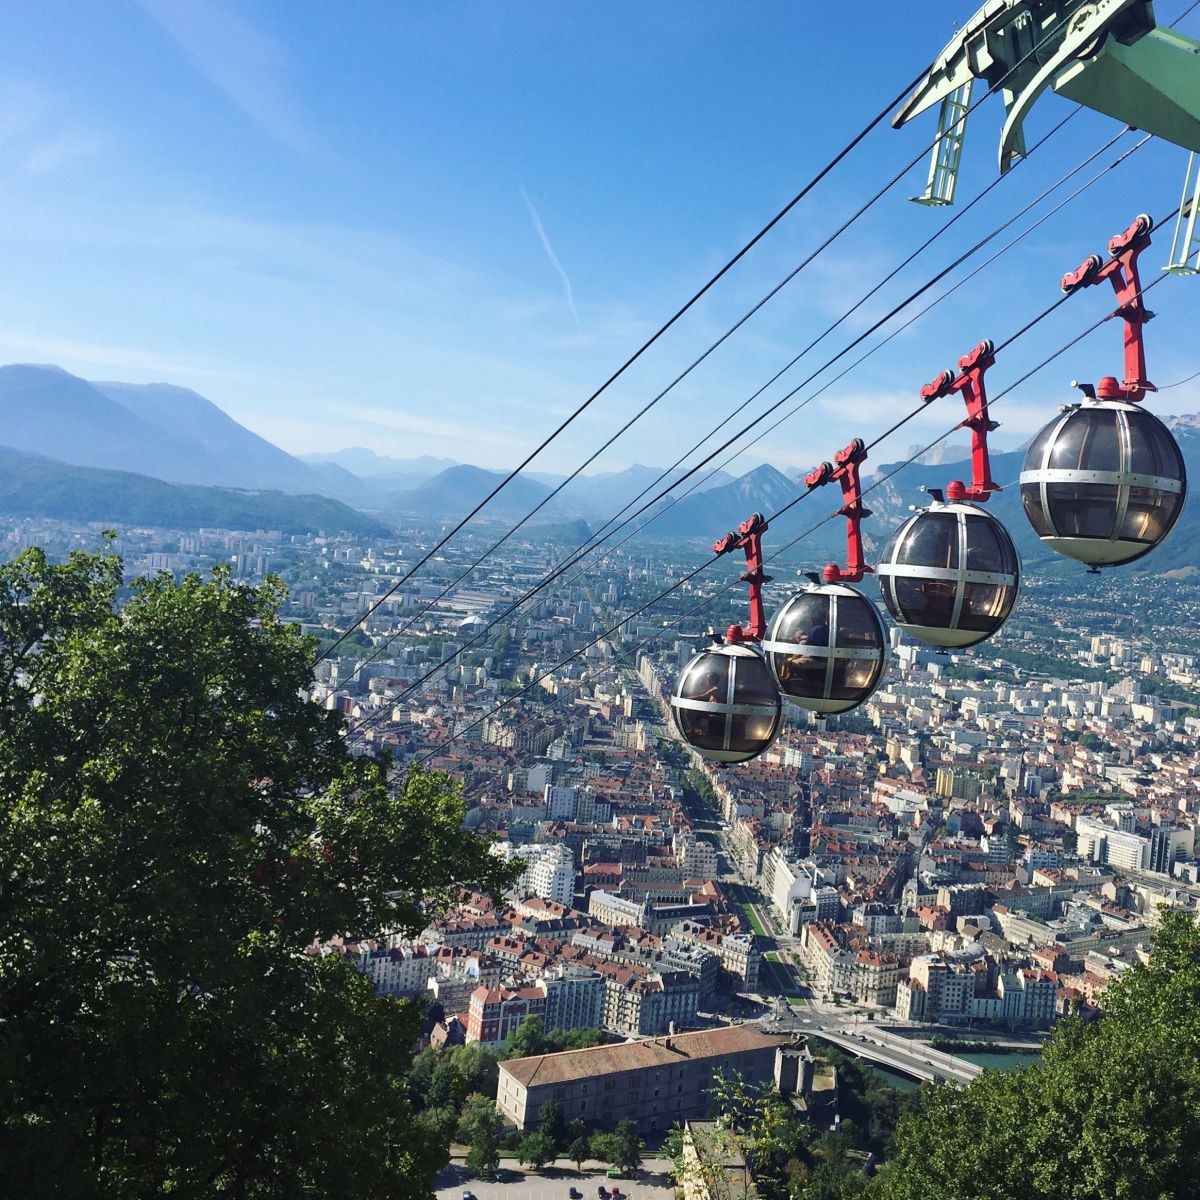 ACQUAINTANCE WITH THE CITY GRENOBLE